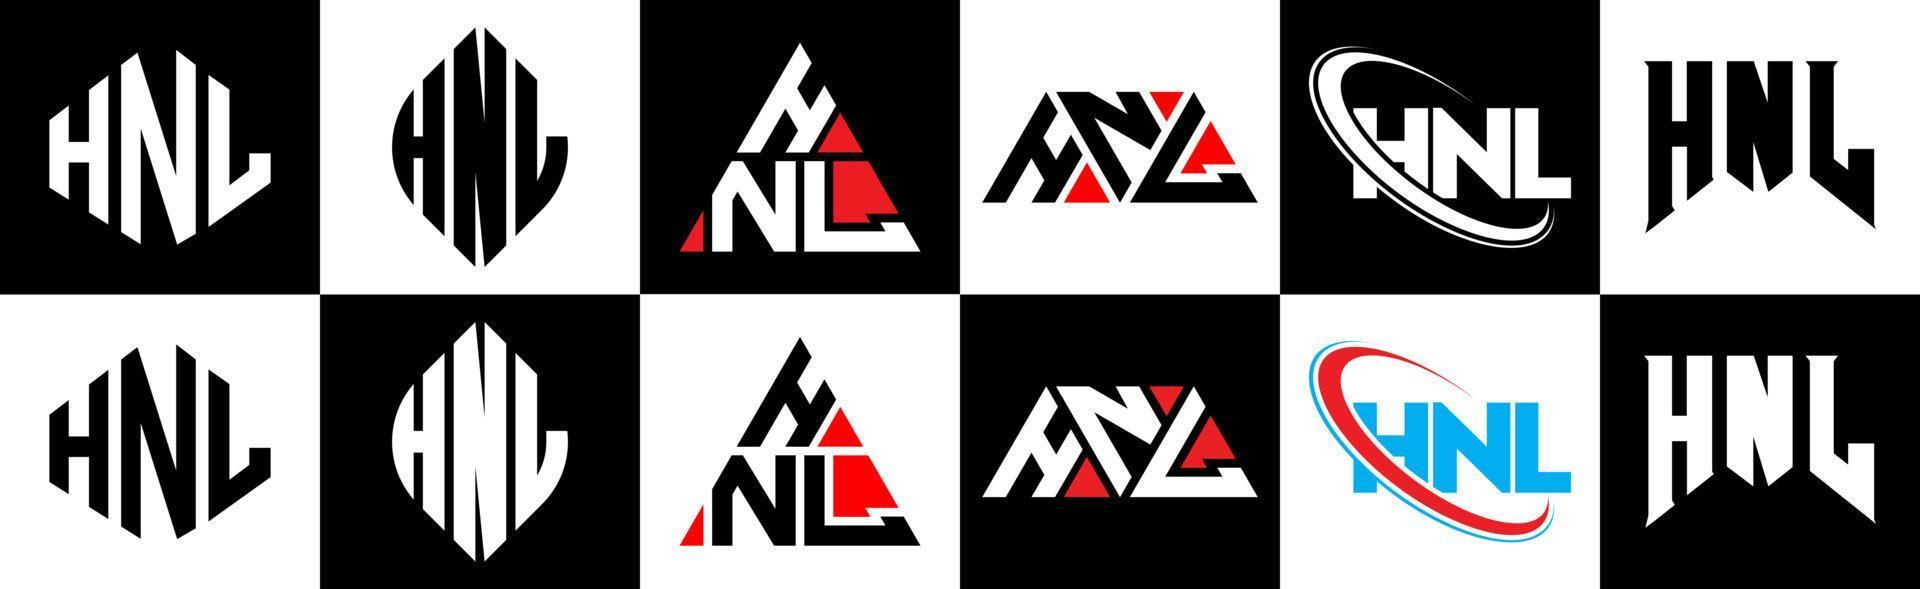 HNL letter logo design in six style. HNL polygon, circle, triangle, hexagon, flat and simple style with black and white color variation letter logo set in one artboard. HNL minimalist and classic logo vector